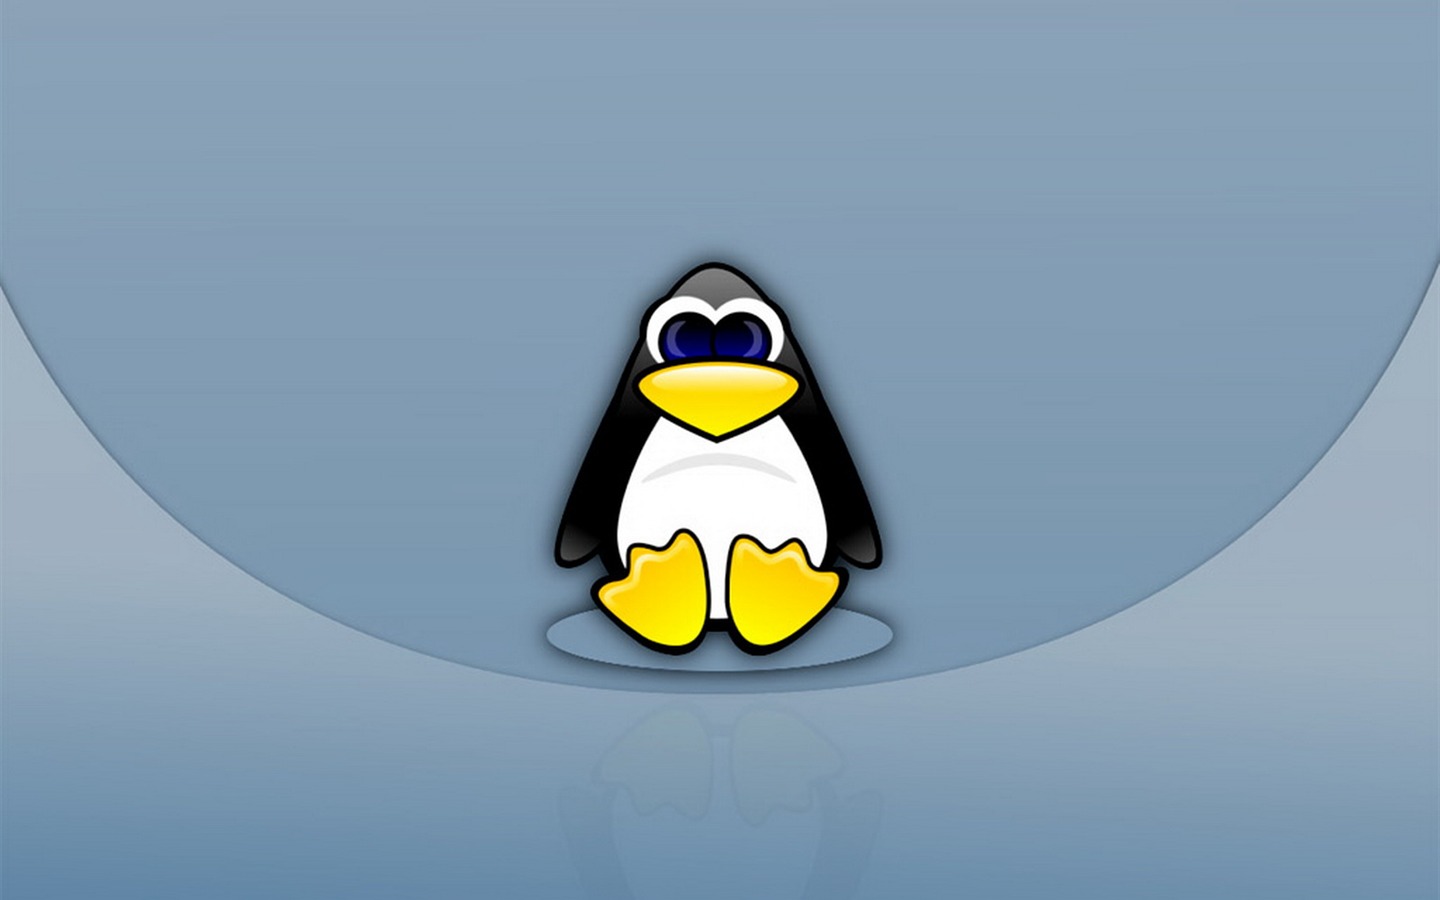 Linux tapety (3) #4 - 1440x900